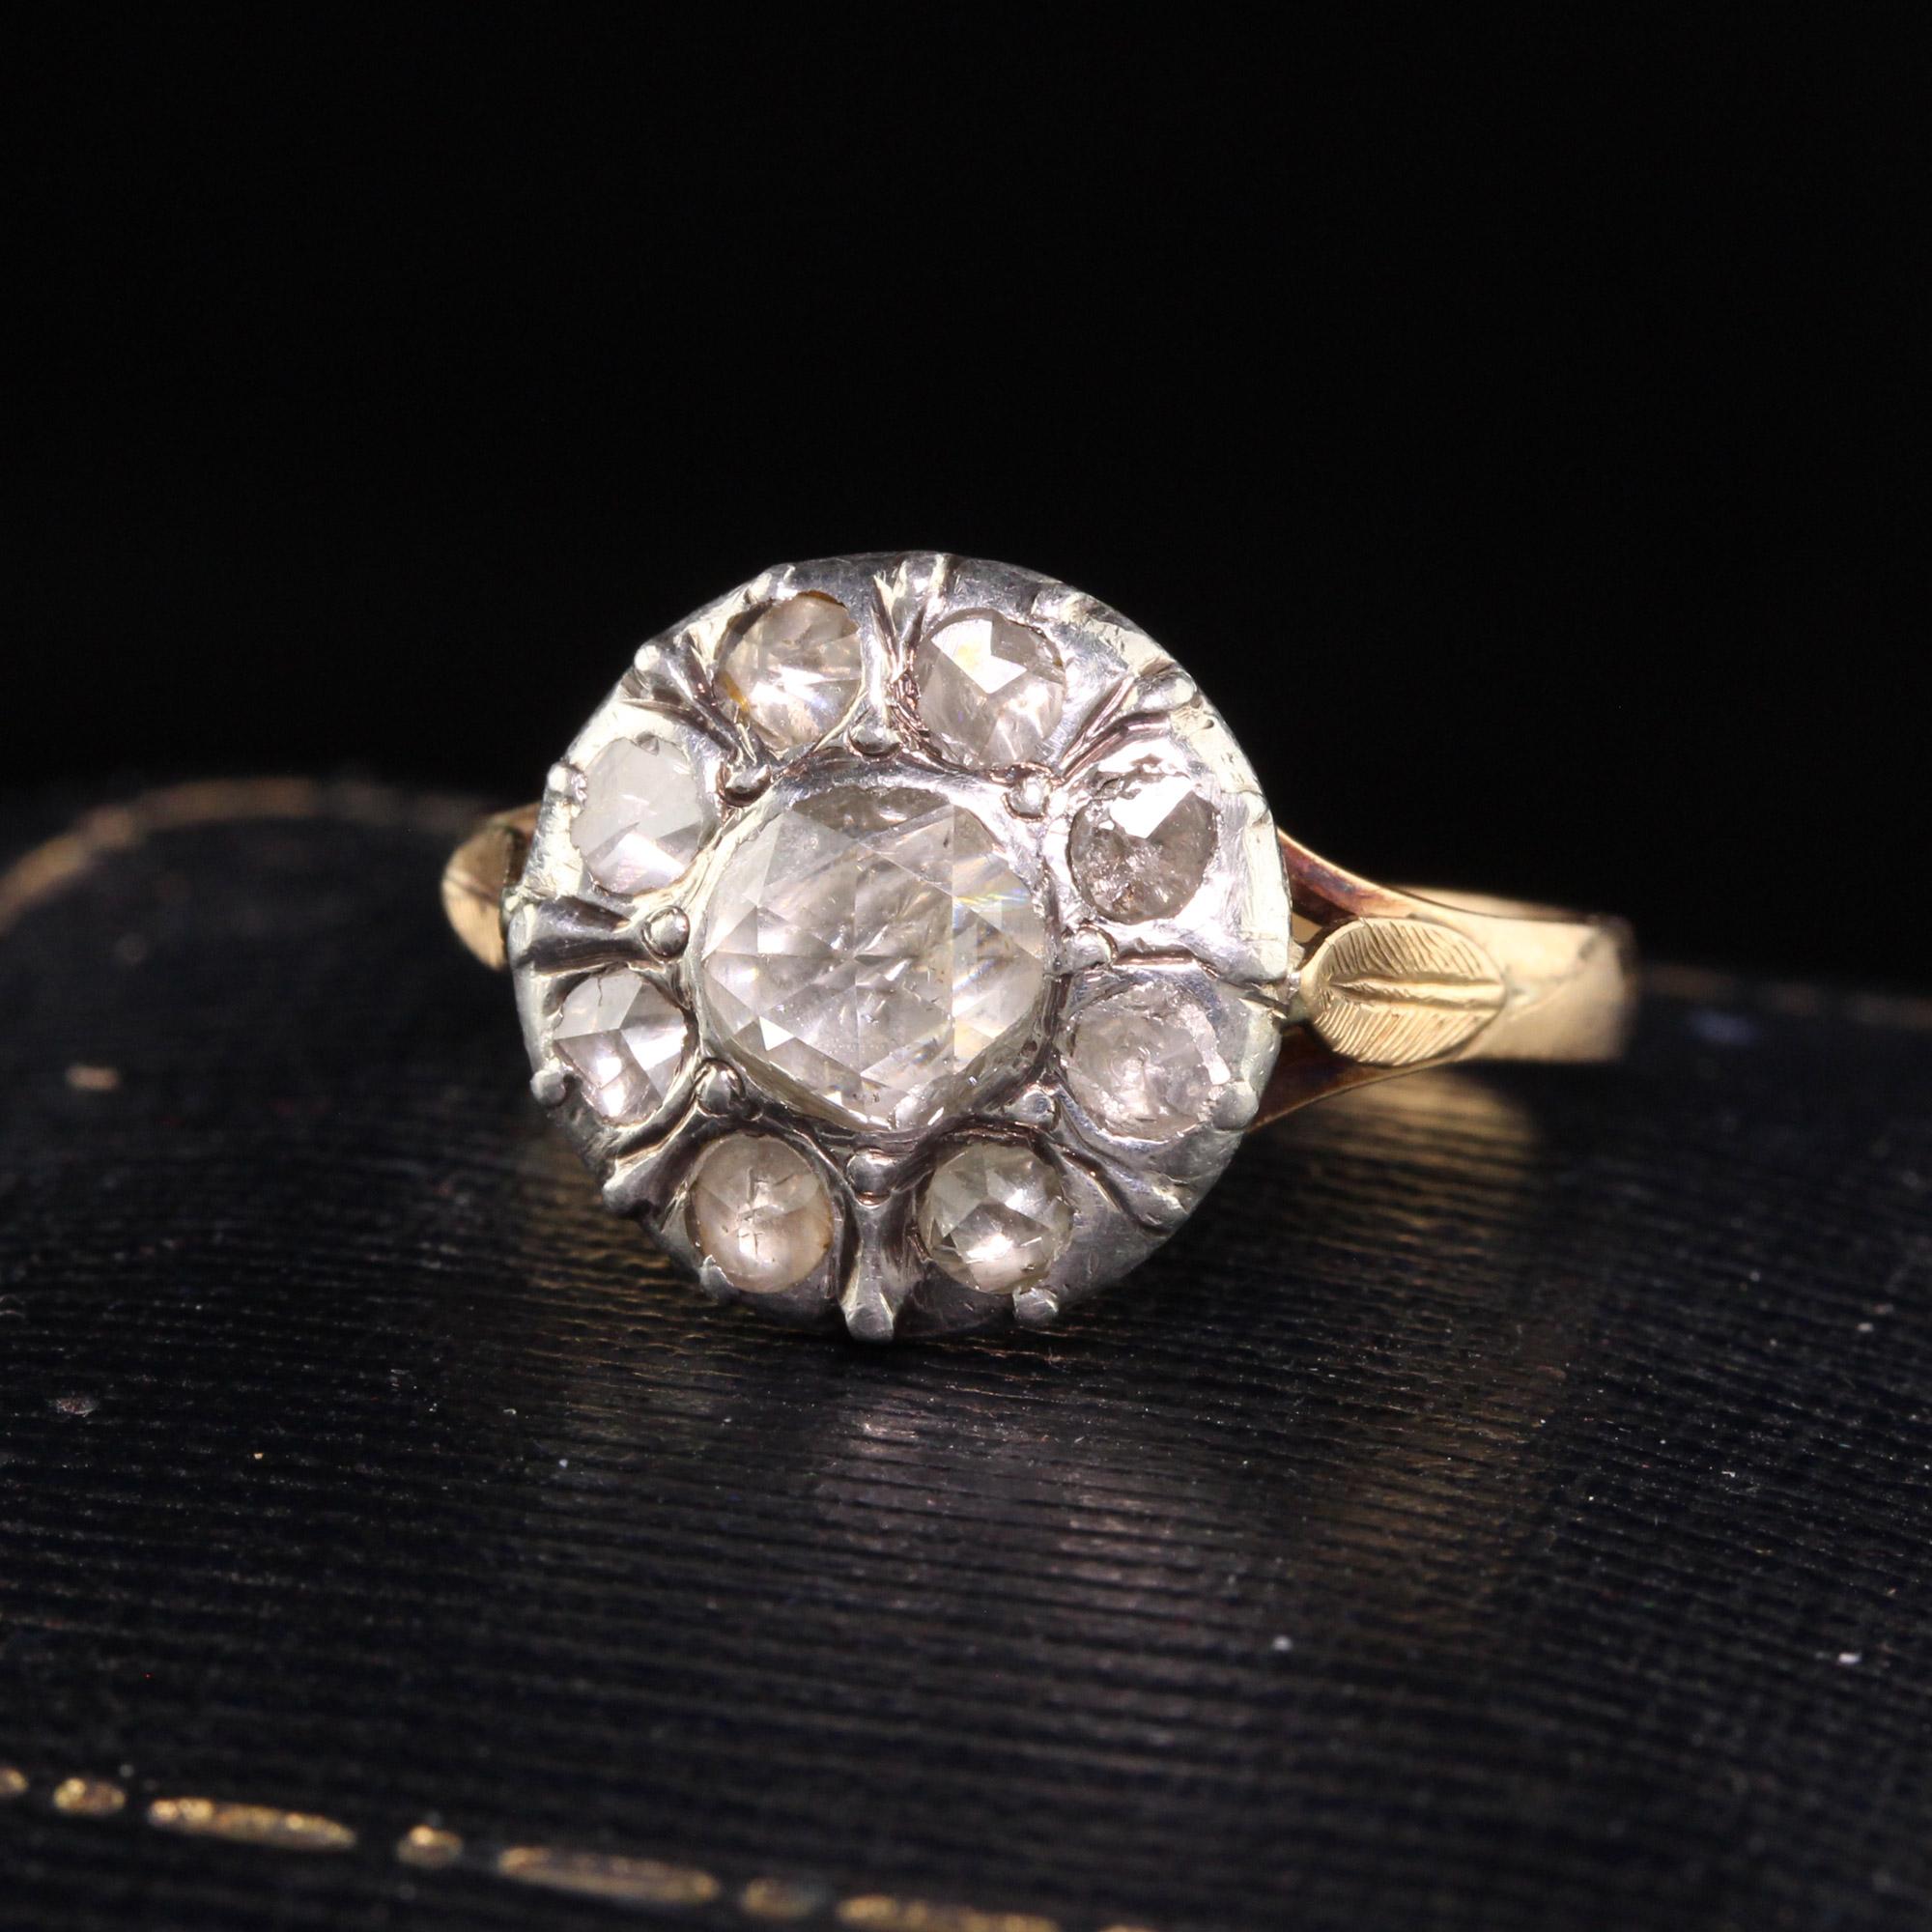 Beautiful Antique Georgian 18K Yellow Gold Silver Top Rose Cut Cluster Engagement Ring. This beautiful Georgian diamond ring has rose cuts surrounding a beautifully faceted rose cut diamond in the center.

Item #R1061

Metal: 18K Yellow Gold and